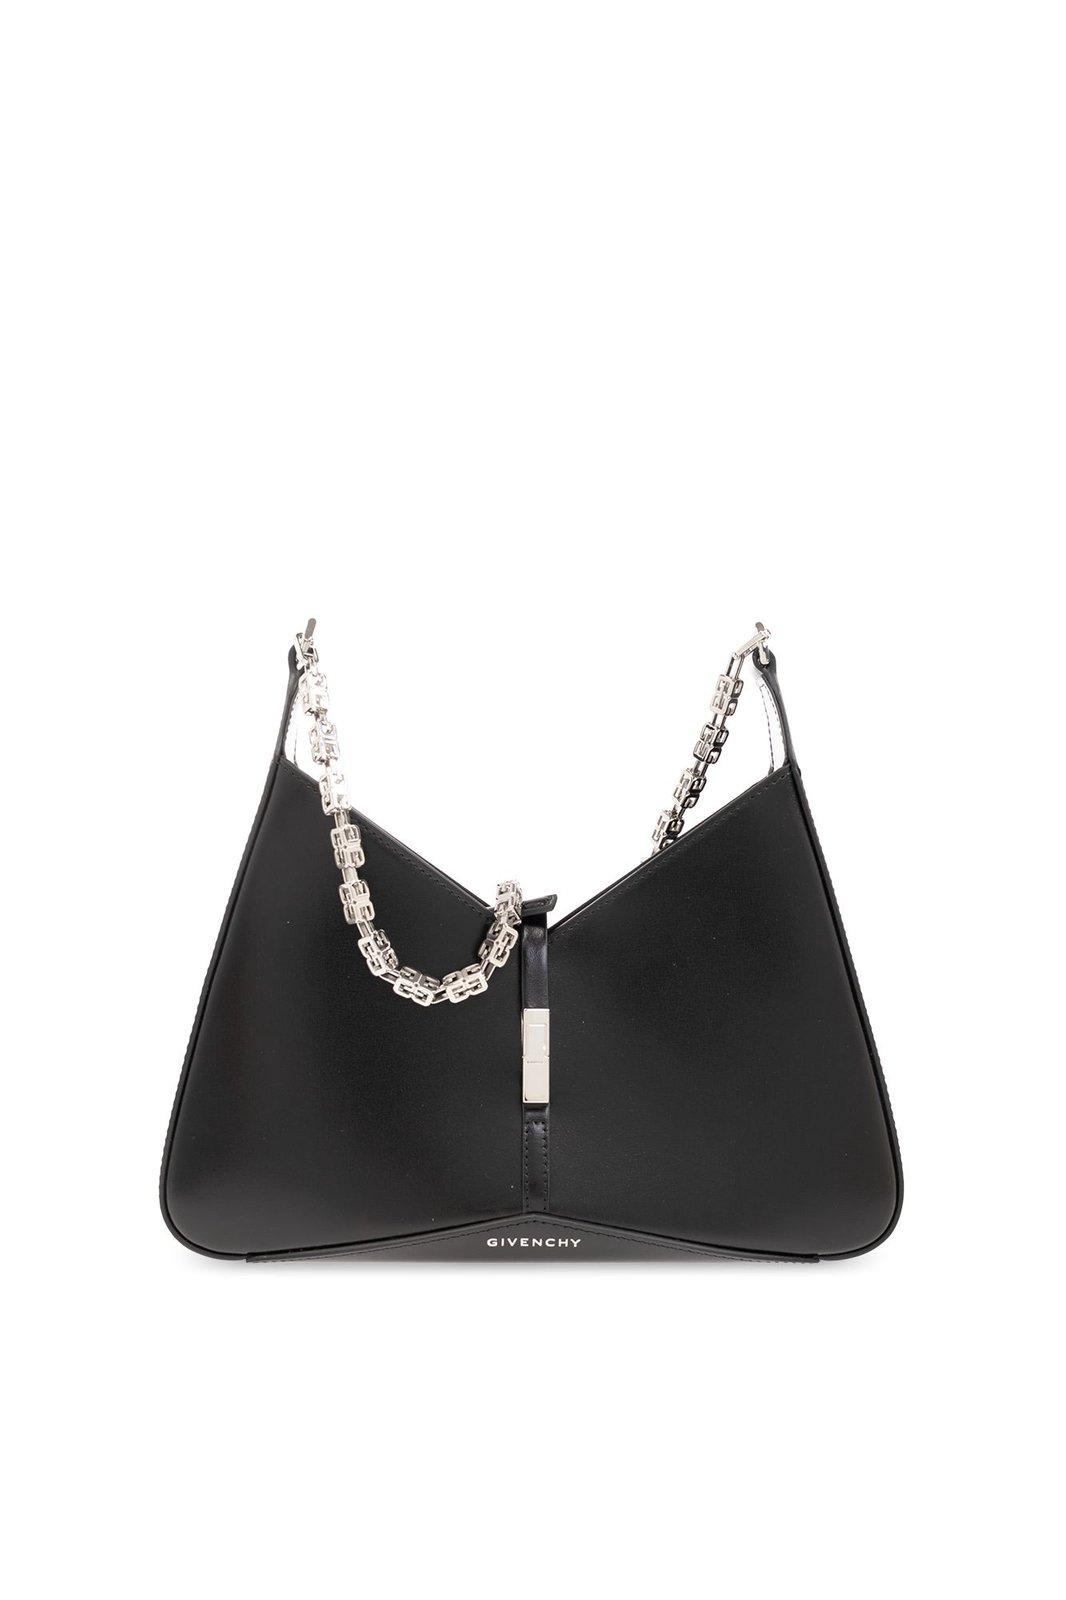 Givenchy Cut-out Small Shoulder Bag In Nero